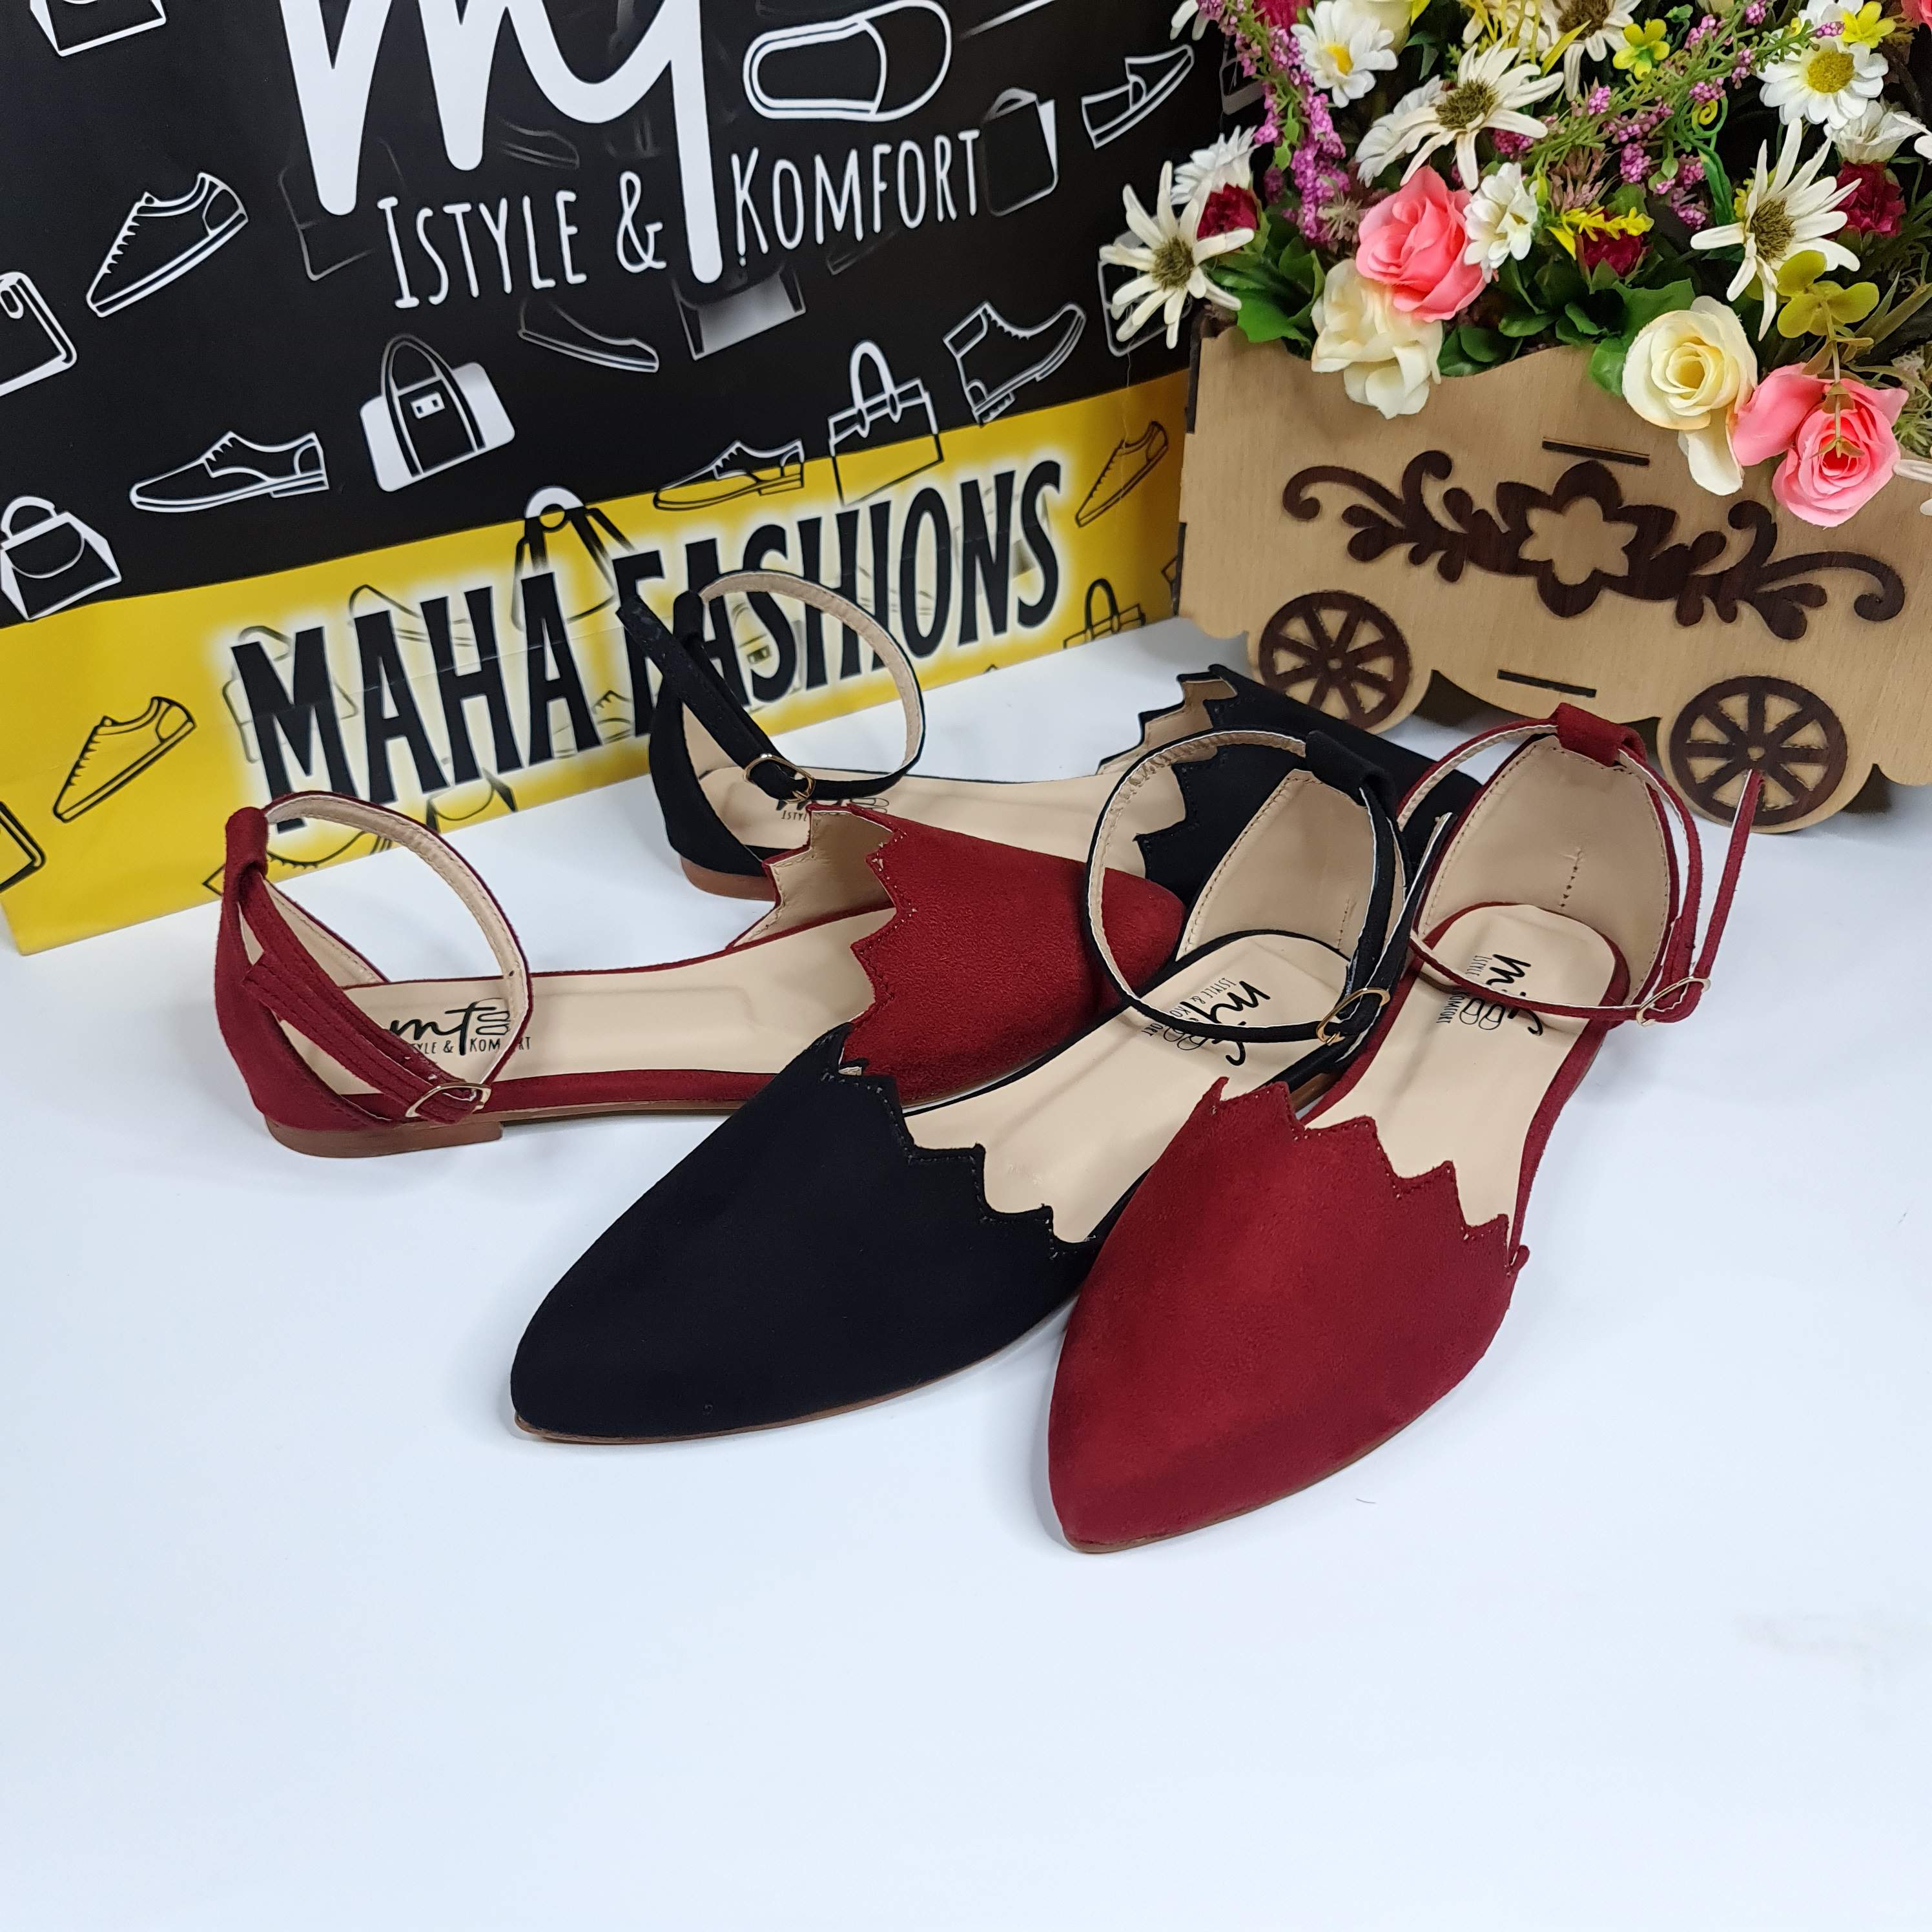 Pointed Close Tow Sandals - Maha fashions -  